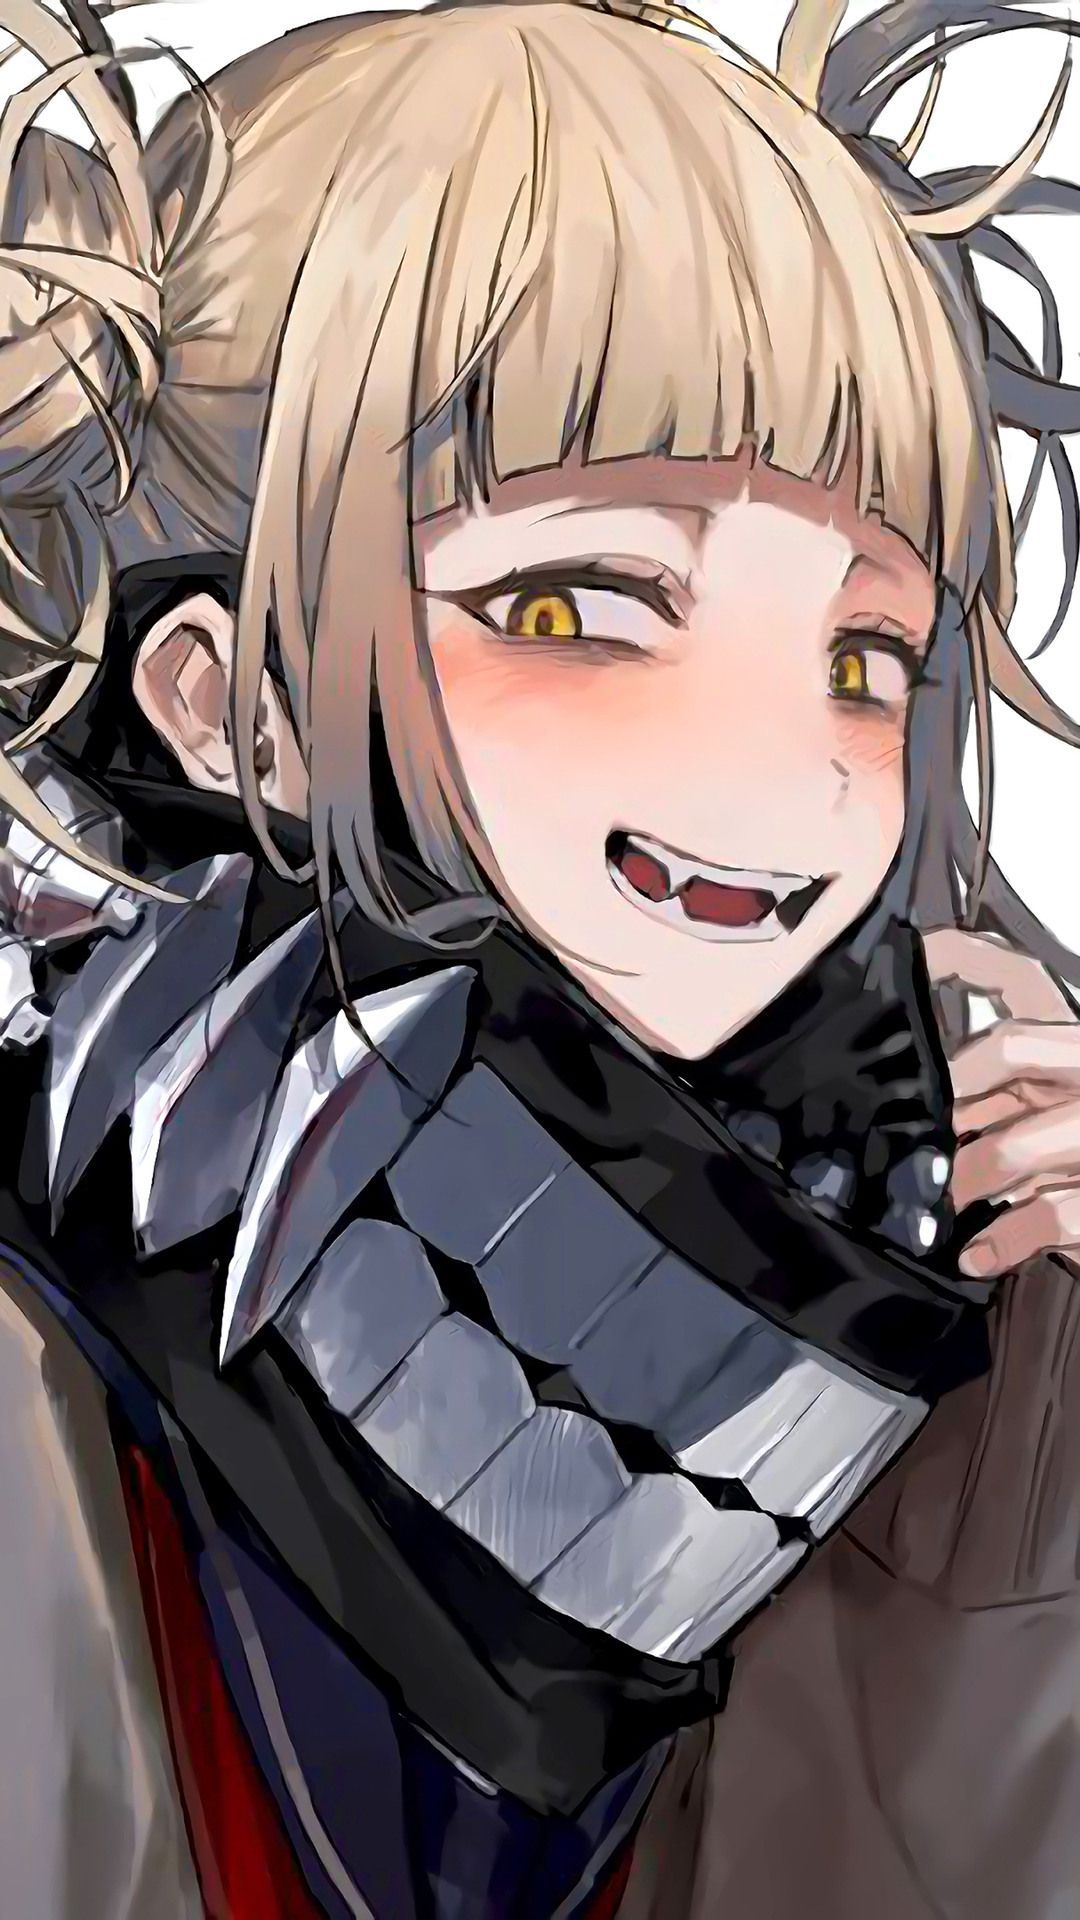 Scared Himiko Toga Wallpapers - Wallpaper Cave